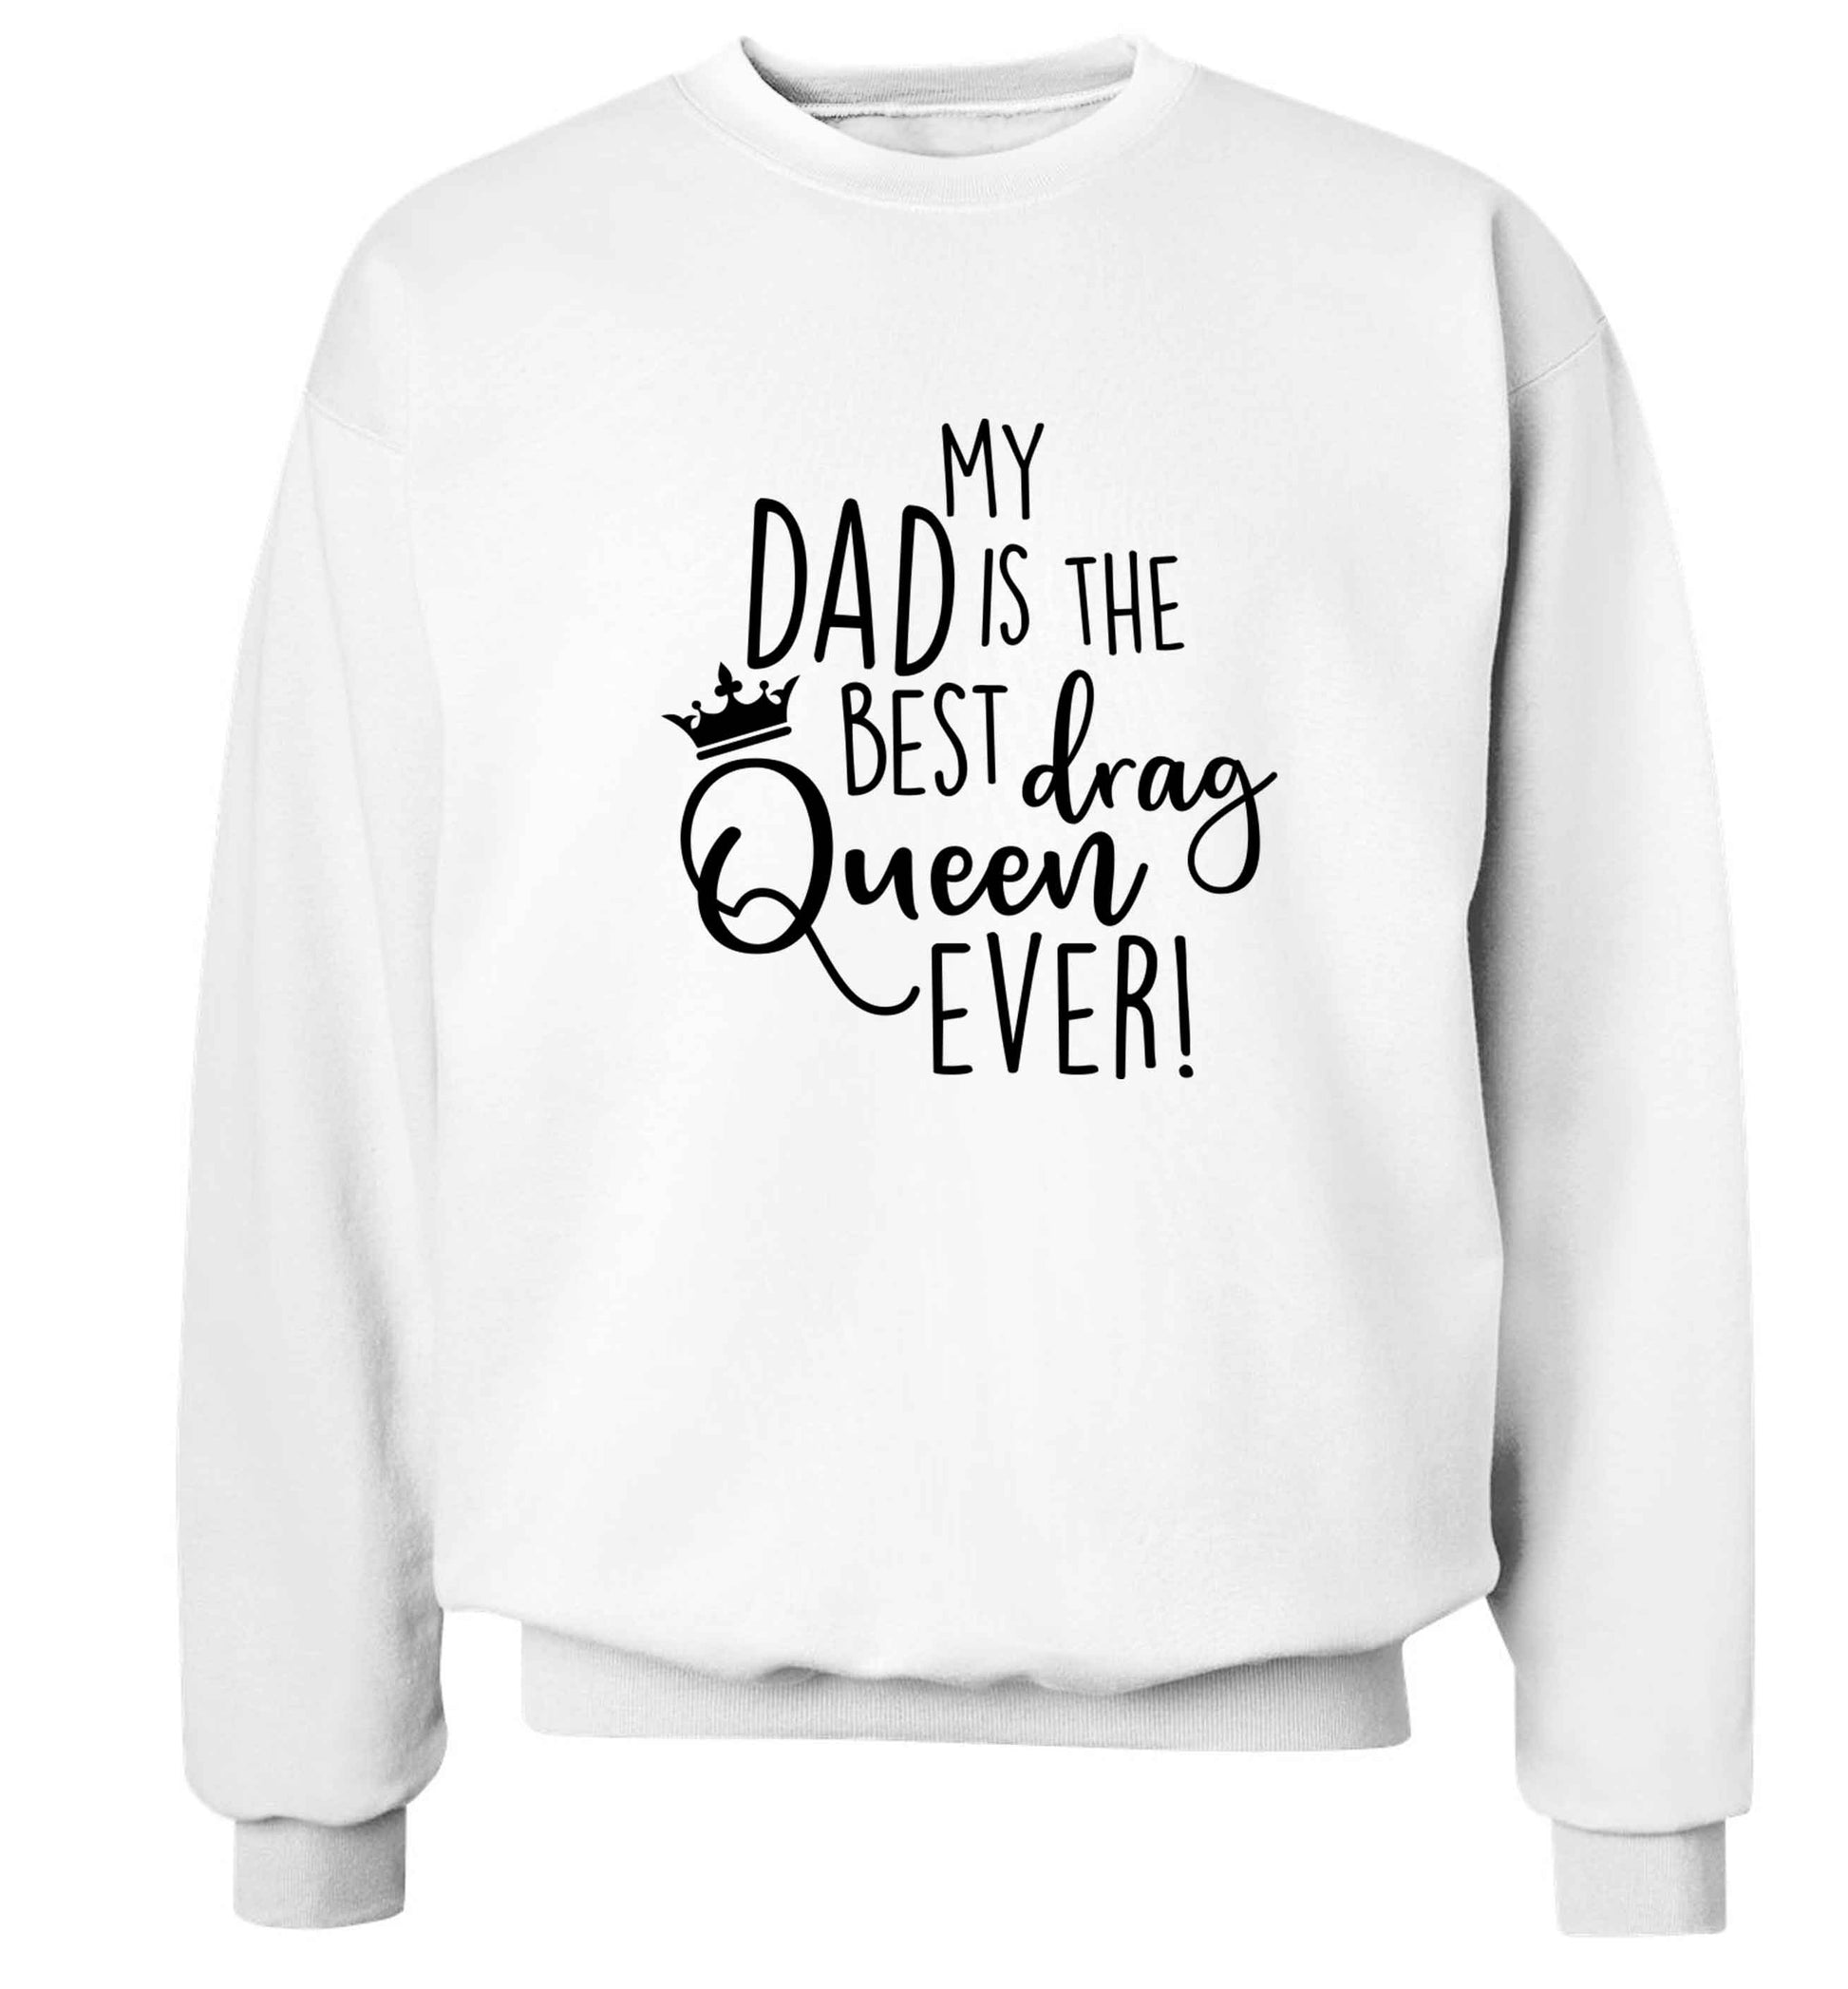 My dad is the best drag Queen ever Adult's unisex white Sweater 2XL